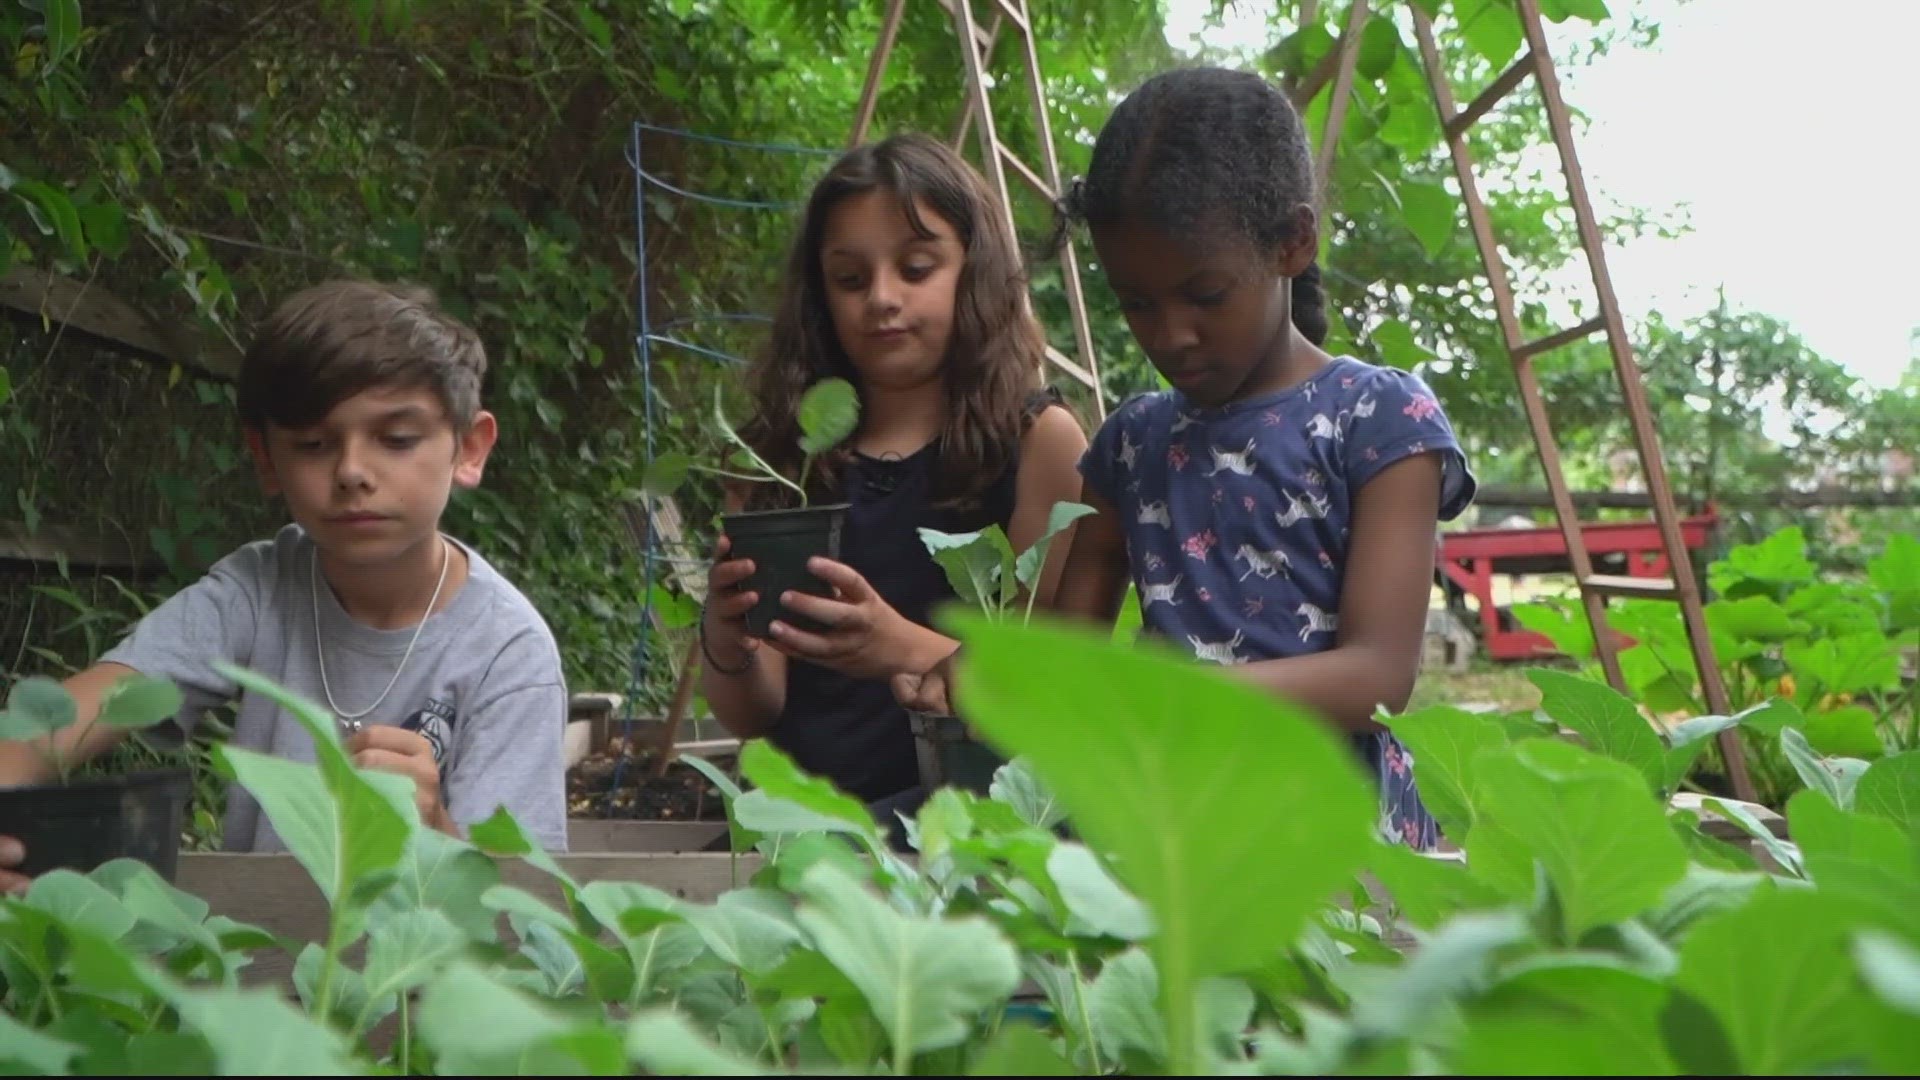 At one DC elementary school, students aren't just heading back to the classroom, they're heading back to the garden.